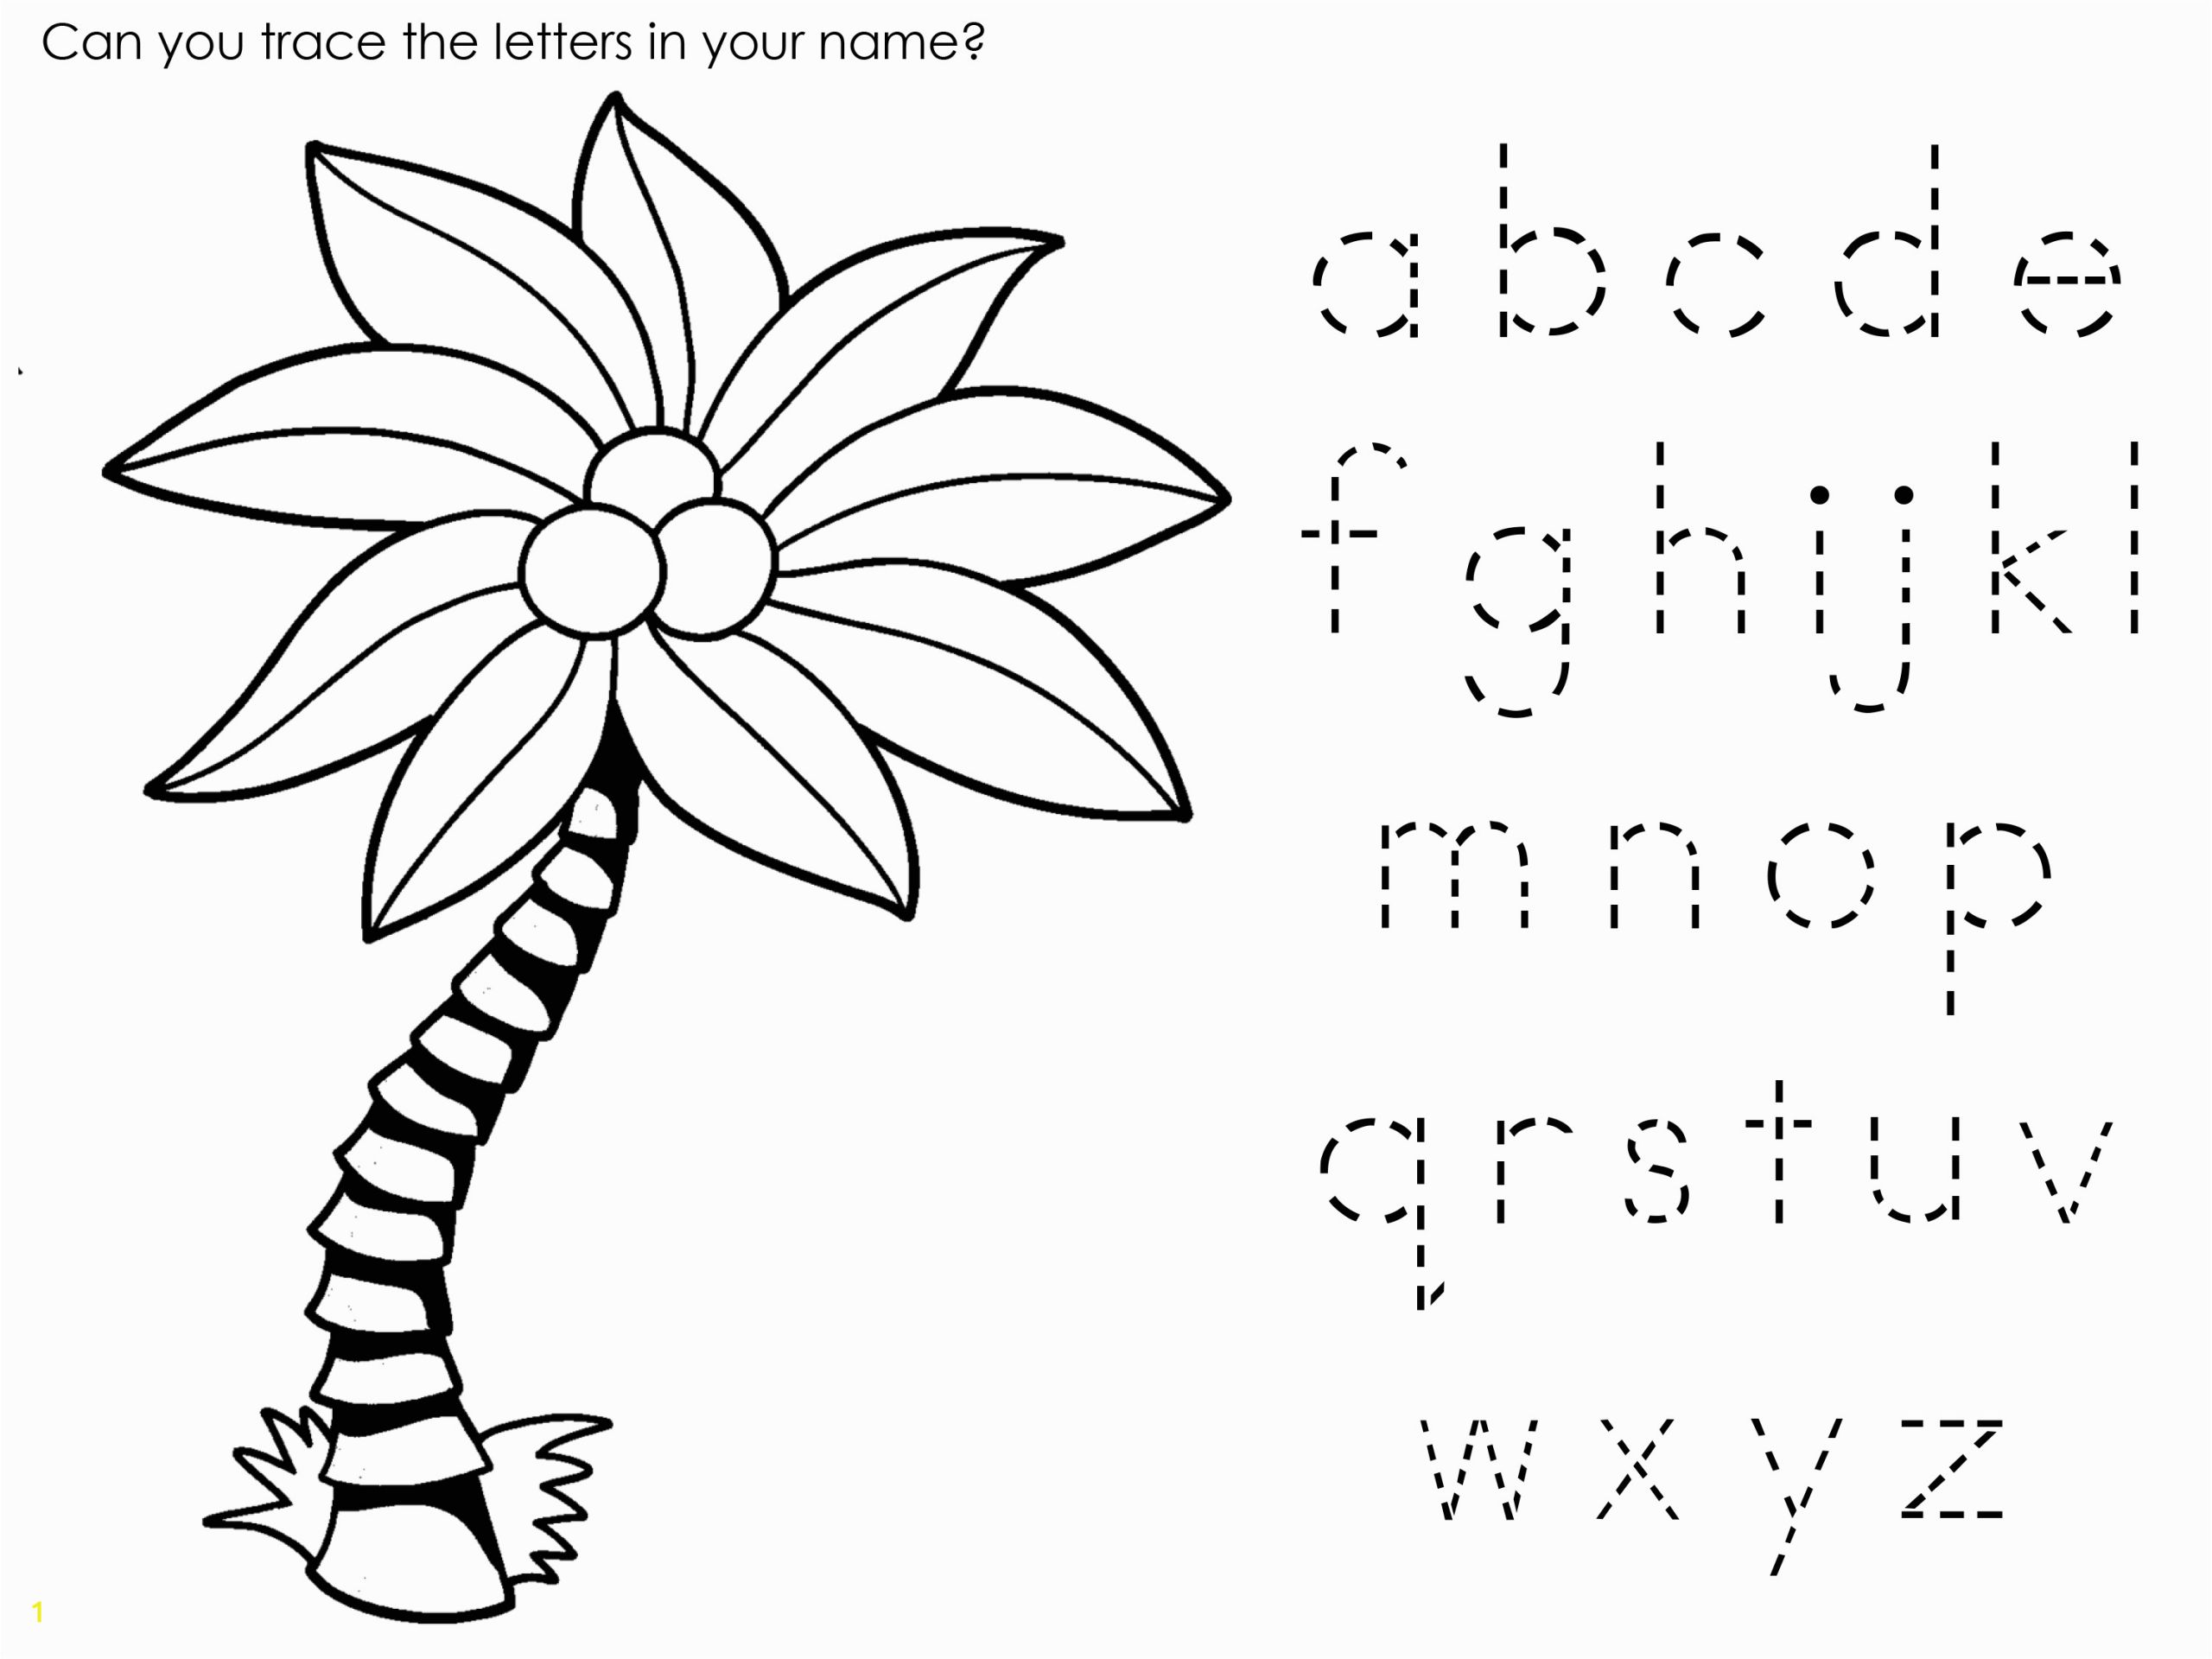 chicka chicka boom boom coloring pages